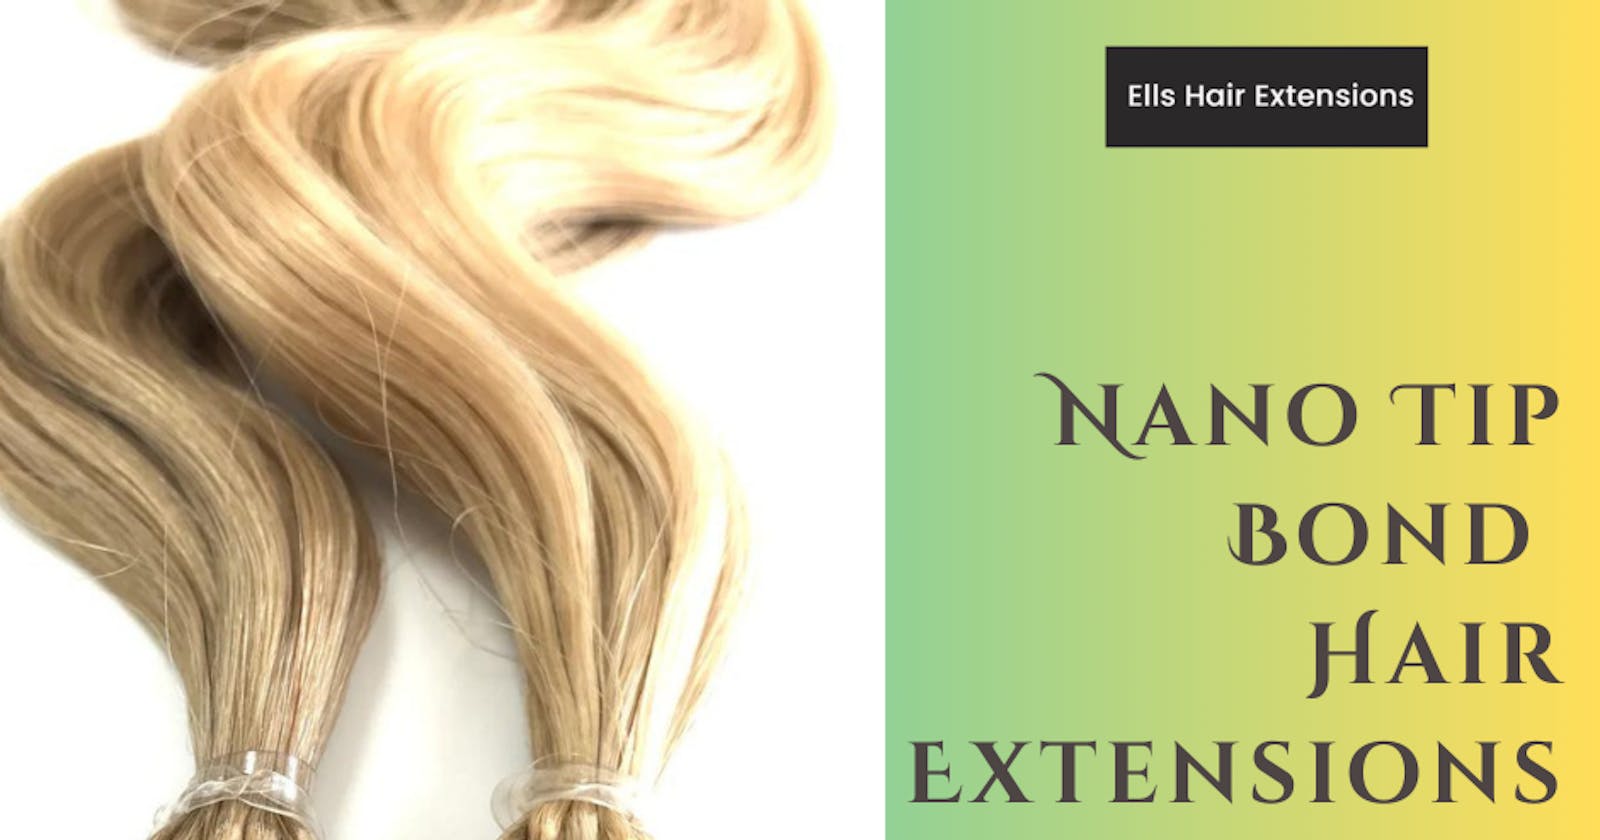 How Can You Enhance Your Hair Beauty By Choosing a Professional Hair Extensions Service?